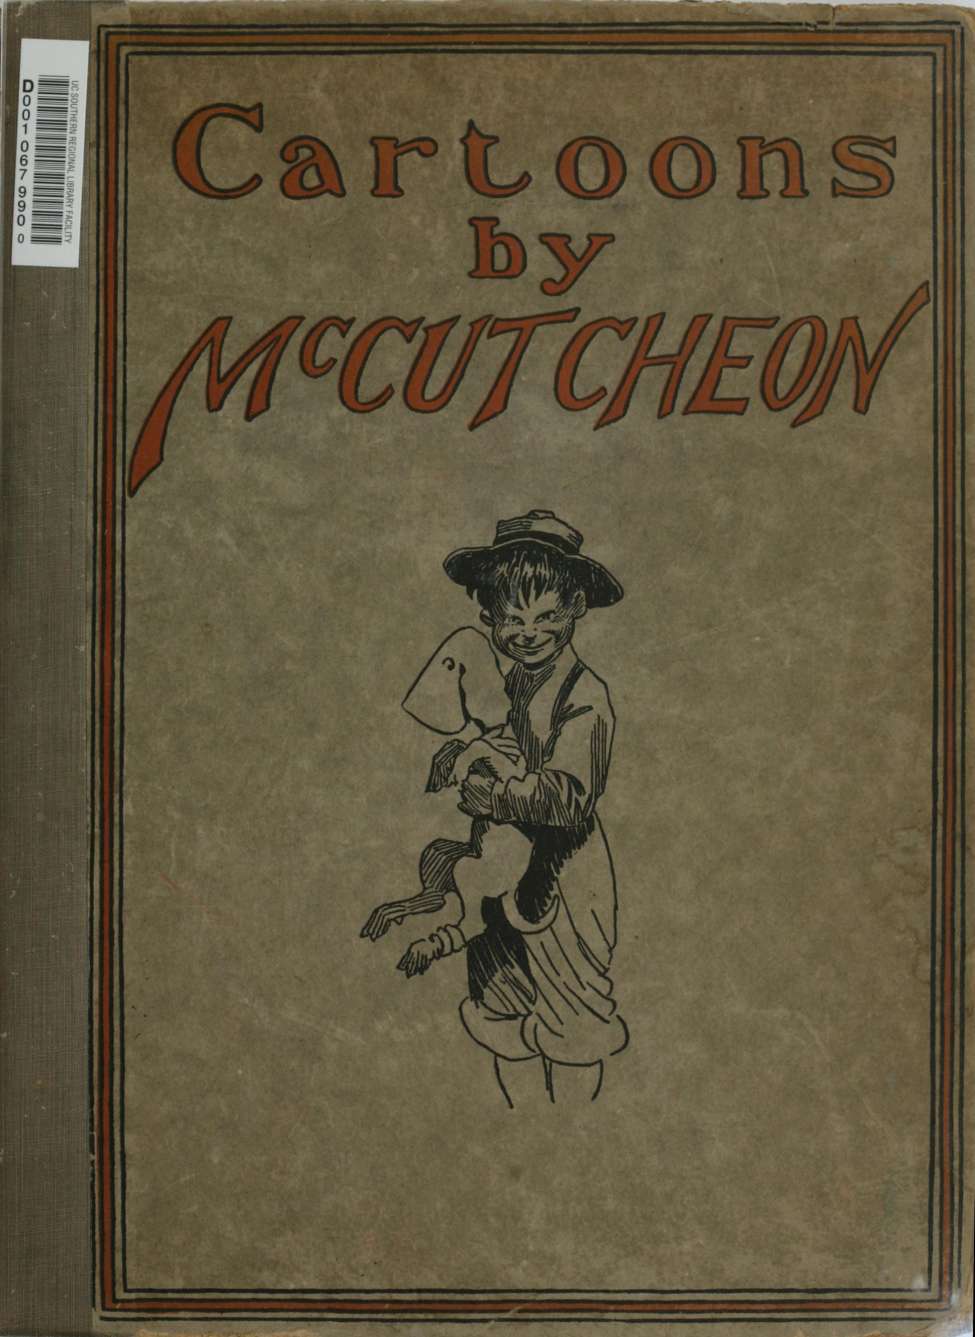 Comic Book Cover For Cartoons by McCutcheon